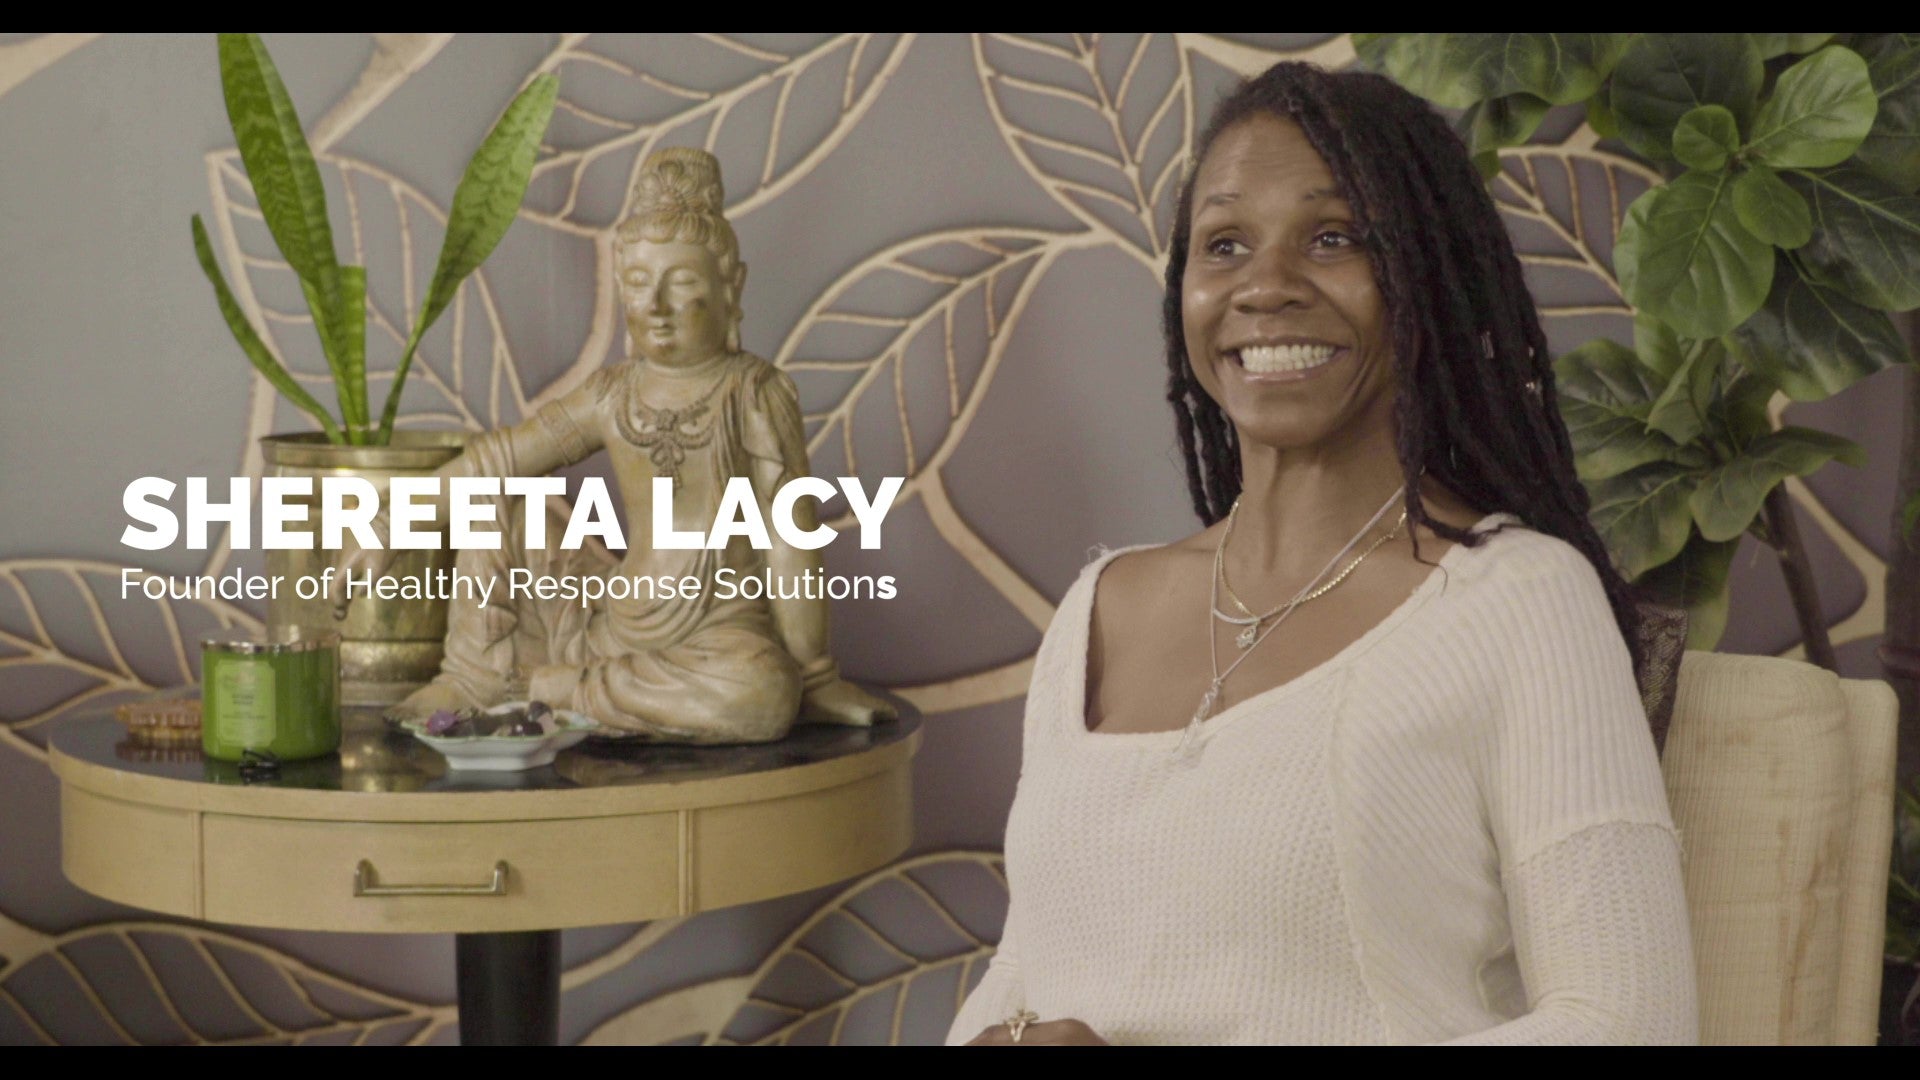 Load video: Shereeta Lacy discusses Healthy Response Solutions